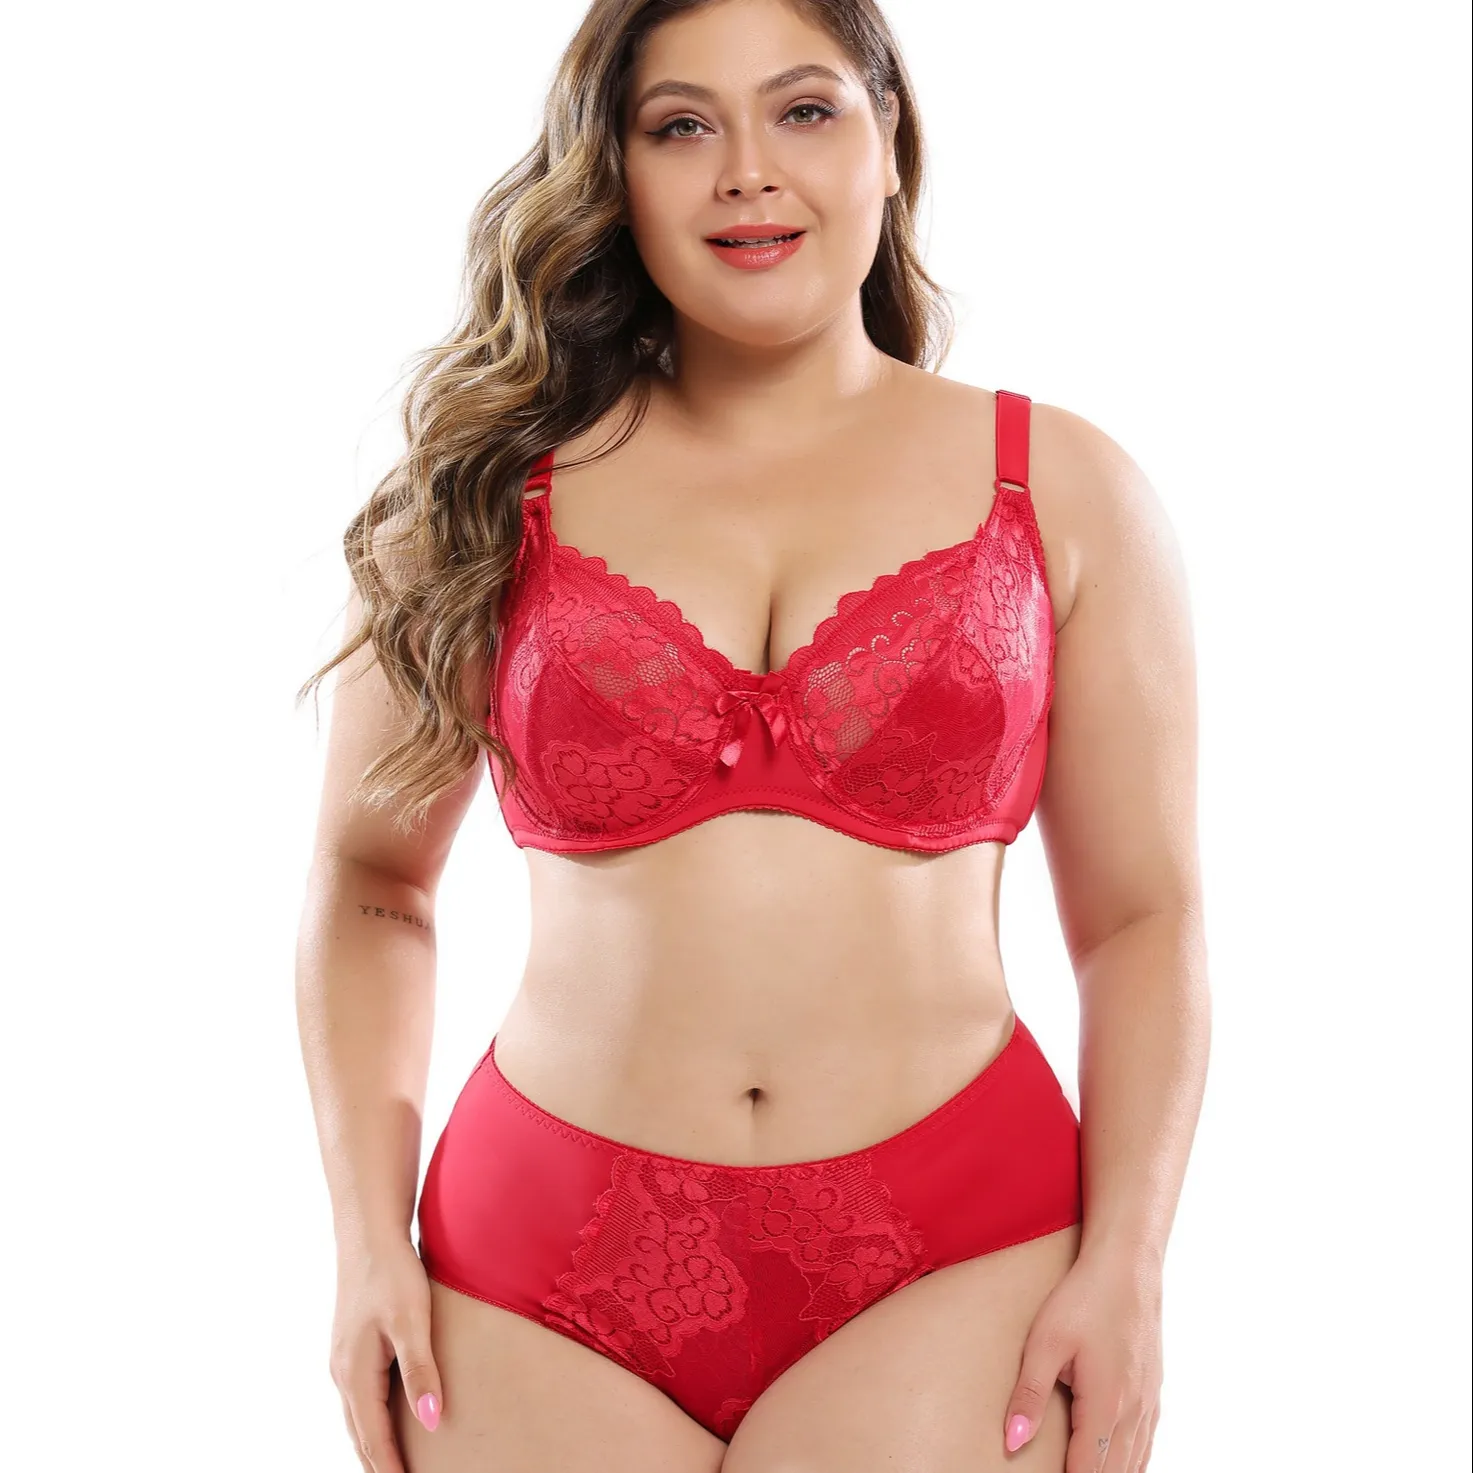 New Plus Size Bras And Panties Sets For Women Ladies Sexy Plus Size Big Full Coverage Cup Underwear Panty Set Wholesale Lingerie